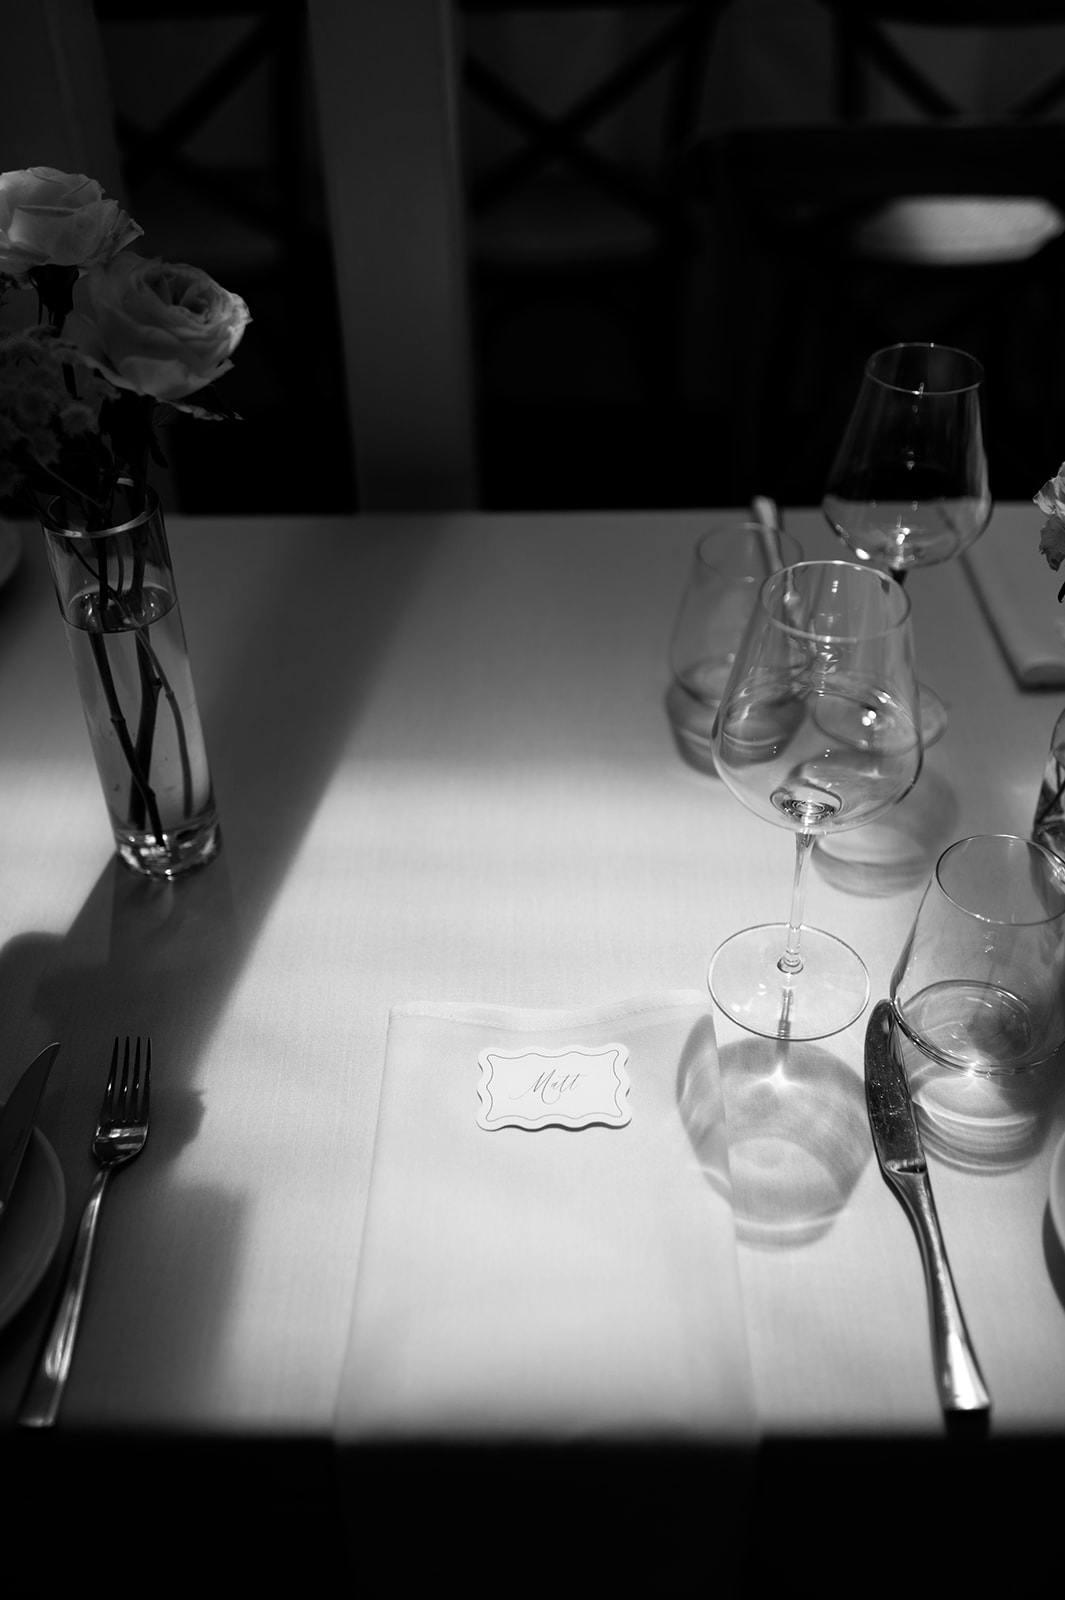 Black and white photo of a neatly set table with two vases of flowers, multiple empty wine glasses, and a place card reading "Mr" on a napkin. The scene is illuminated by soft natural light, casting shadows on the table.